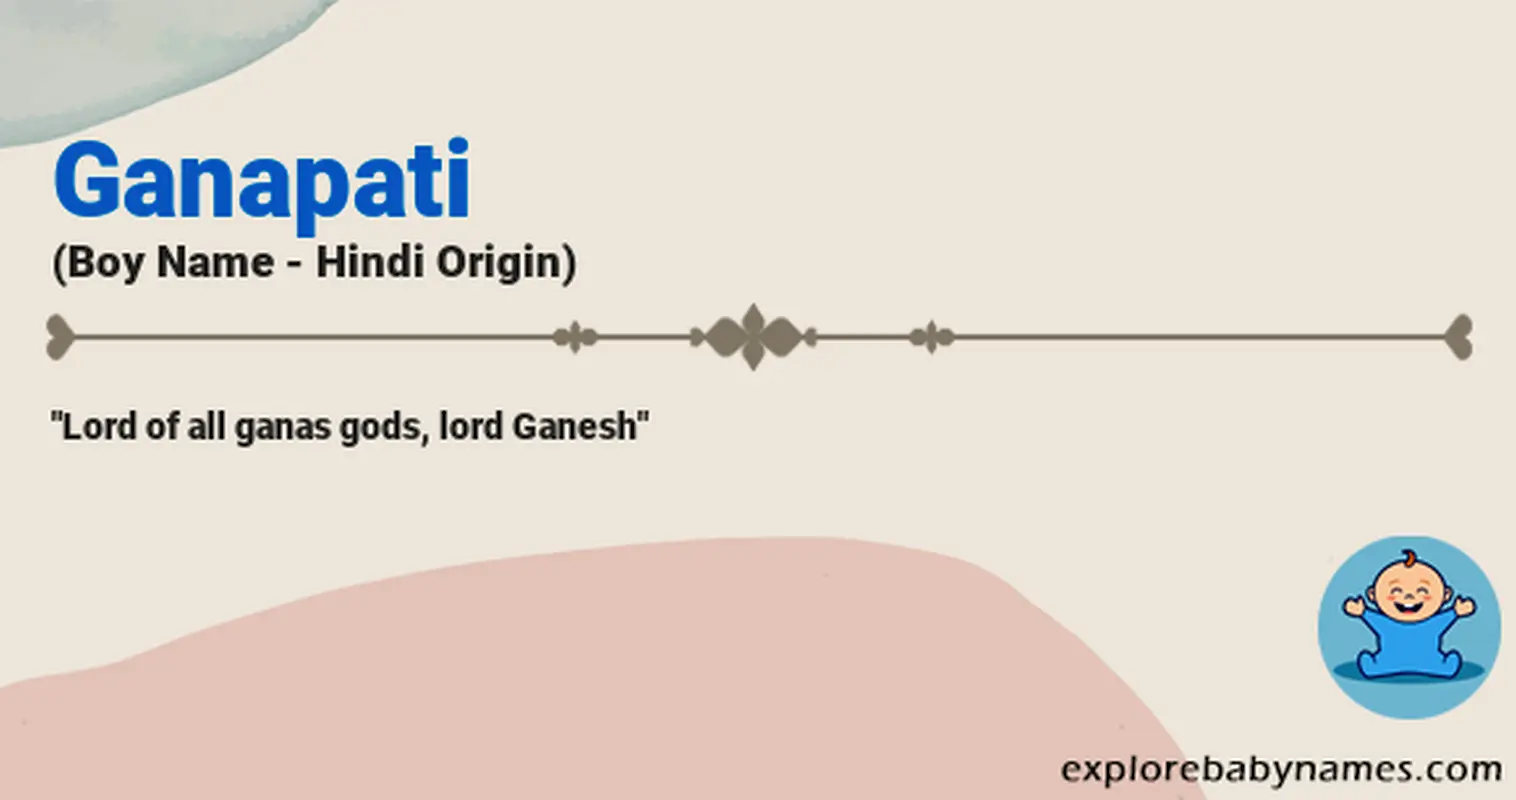 Meaning of Ganapati